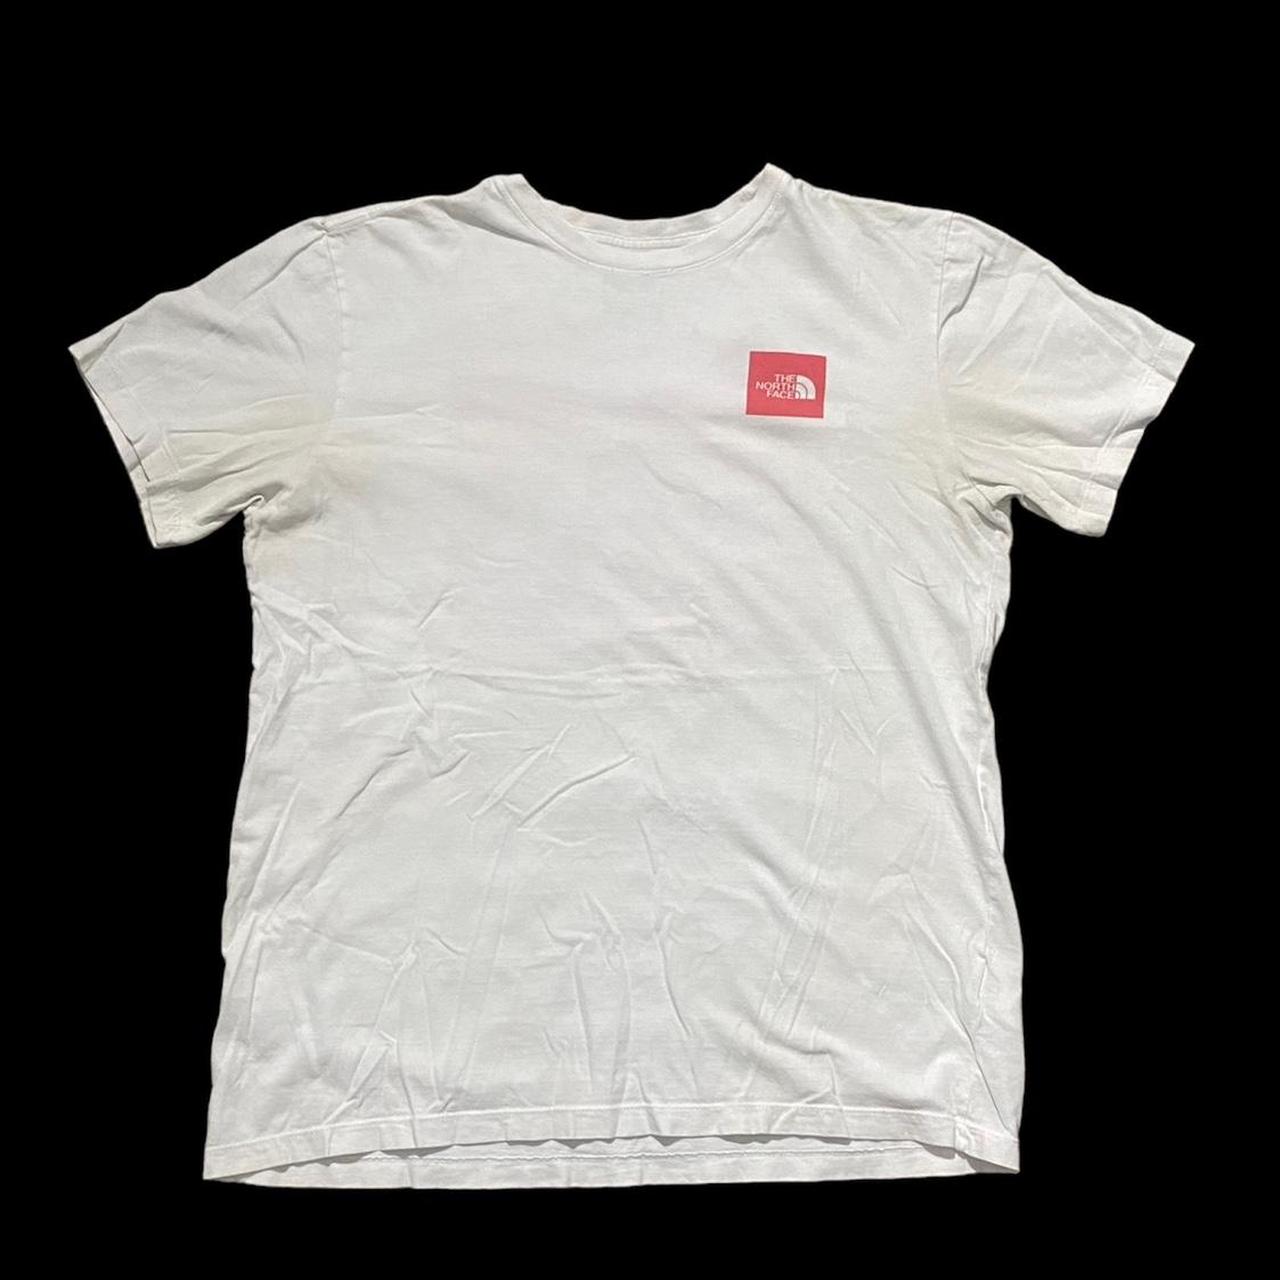 The North Face Men's White and Red T-shirt